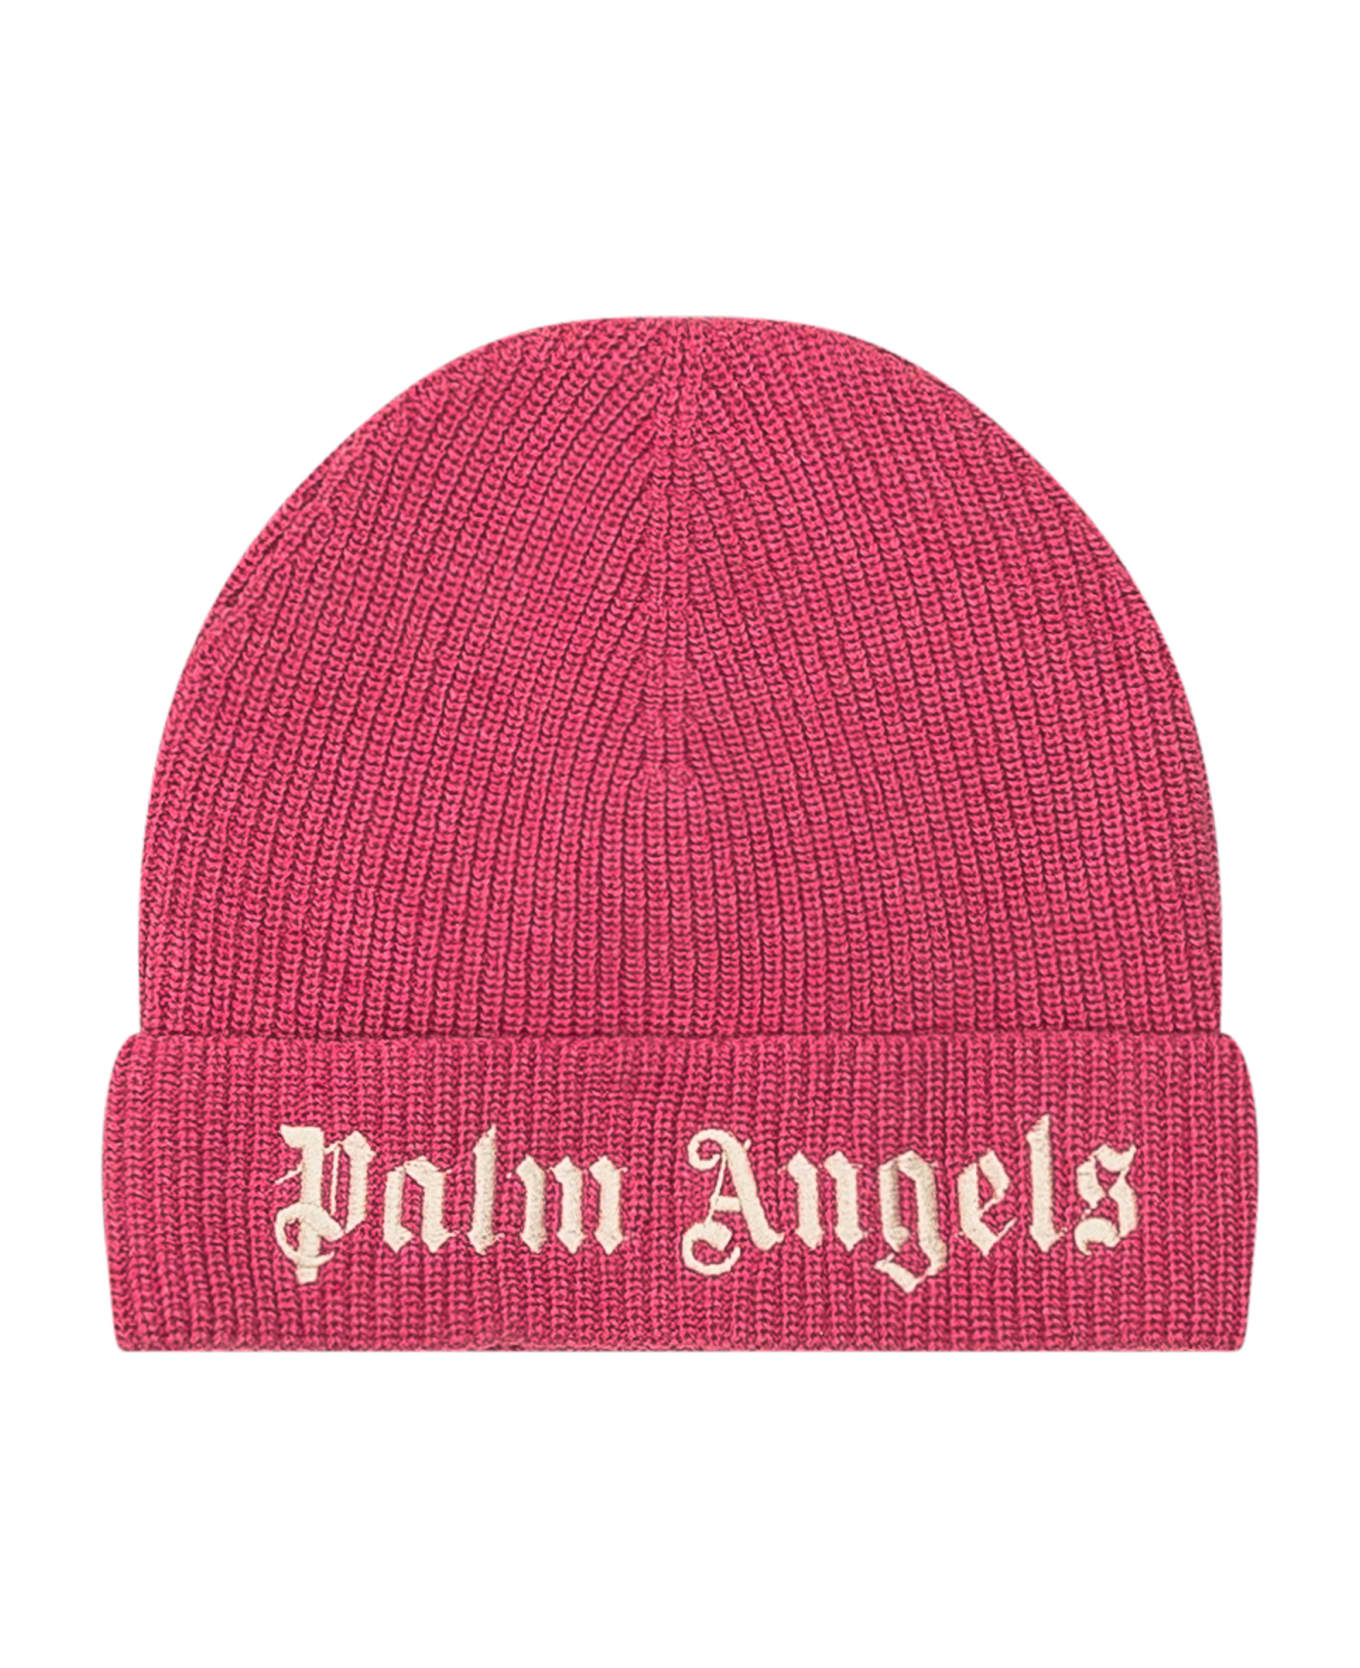 Palm Angels Hat With Logo - FUCHSIA WH アクセサリー＆ギフト